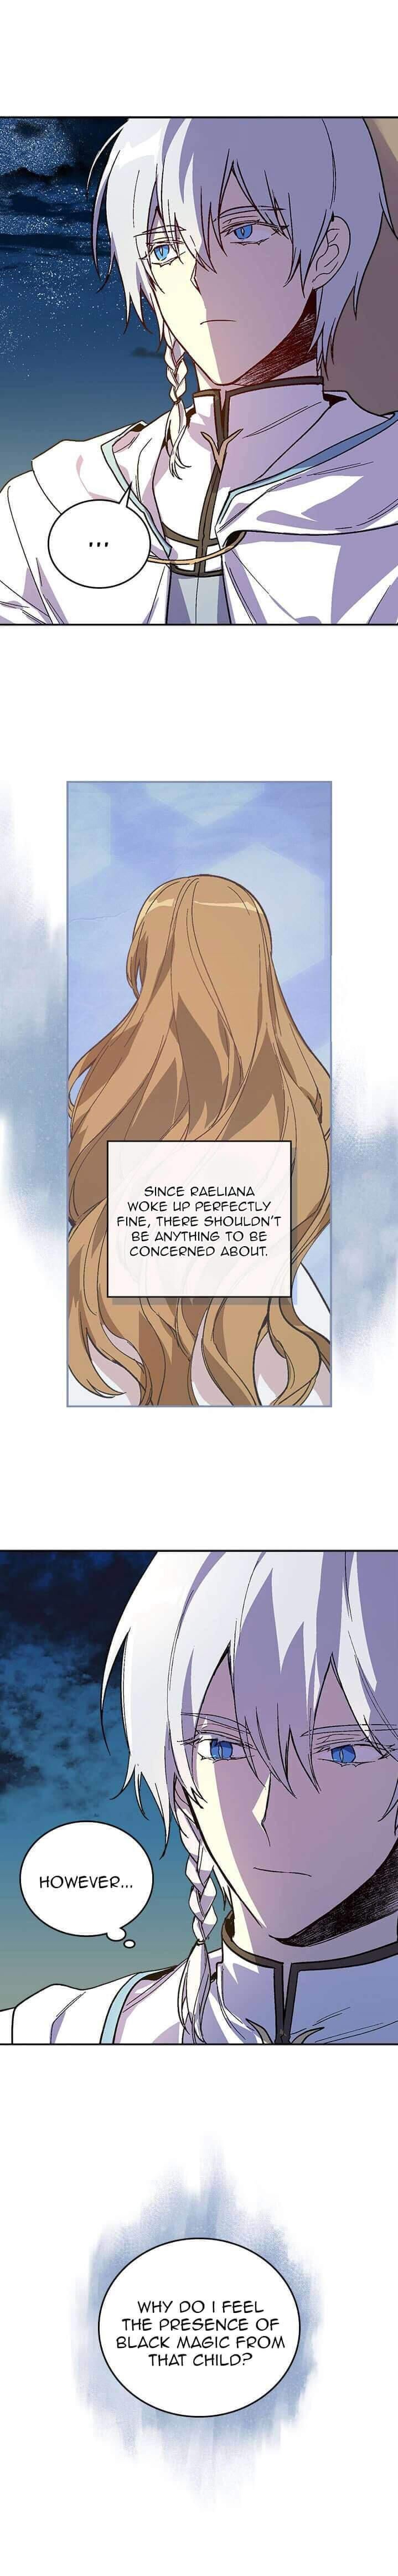 The Reason Why Raeliana Ended Up at the Duke's Mansion Chapter 066 page 6